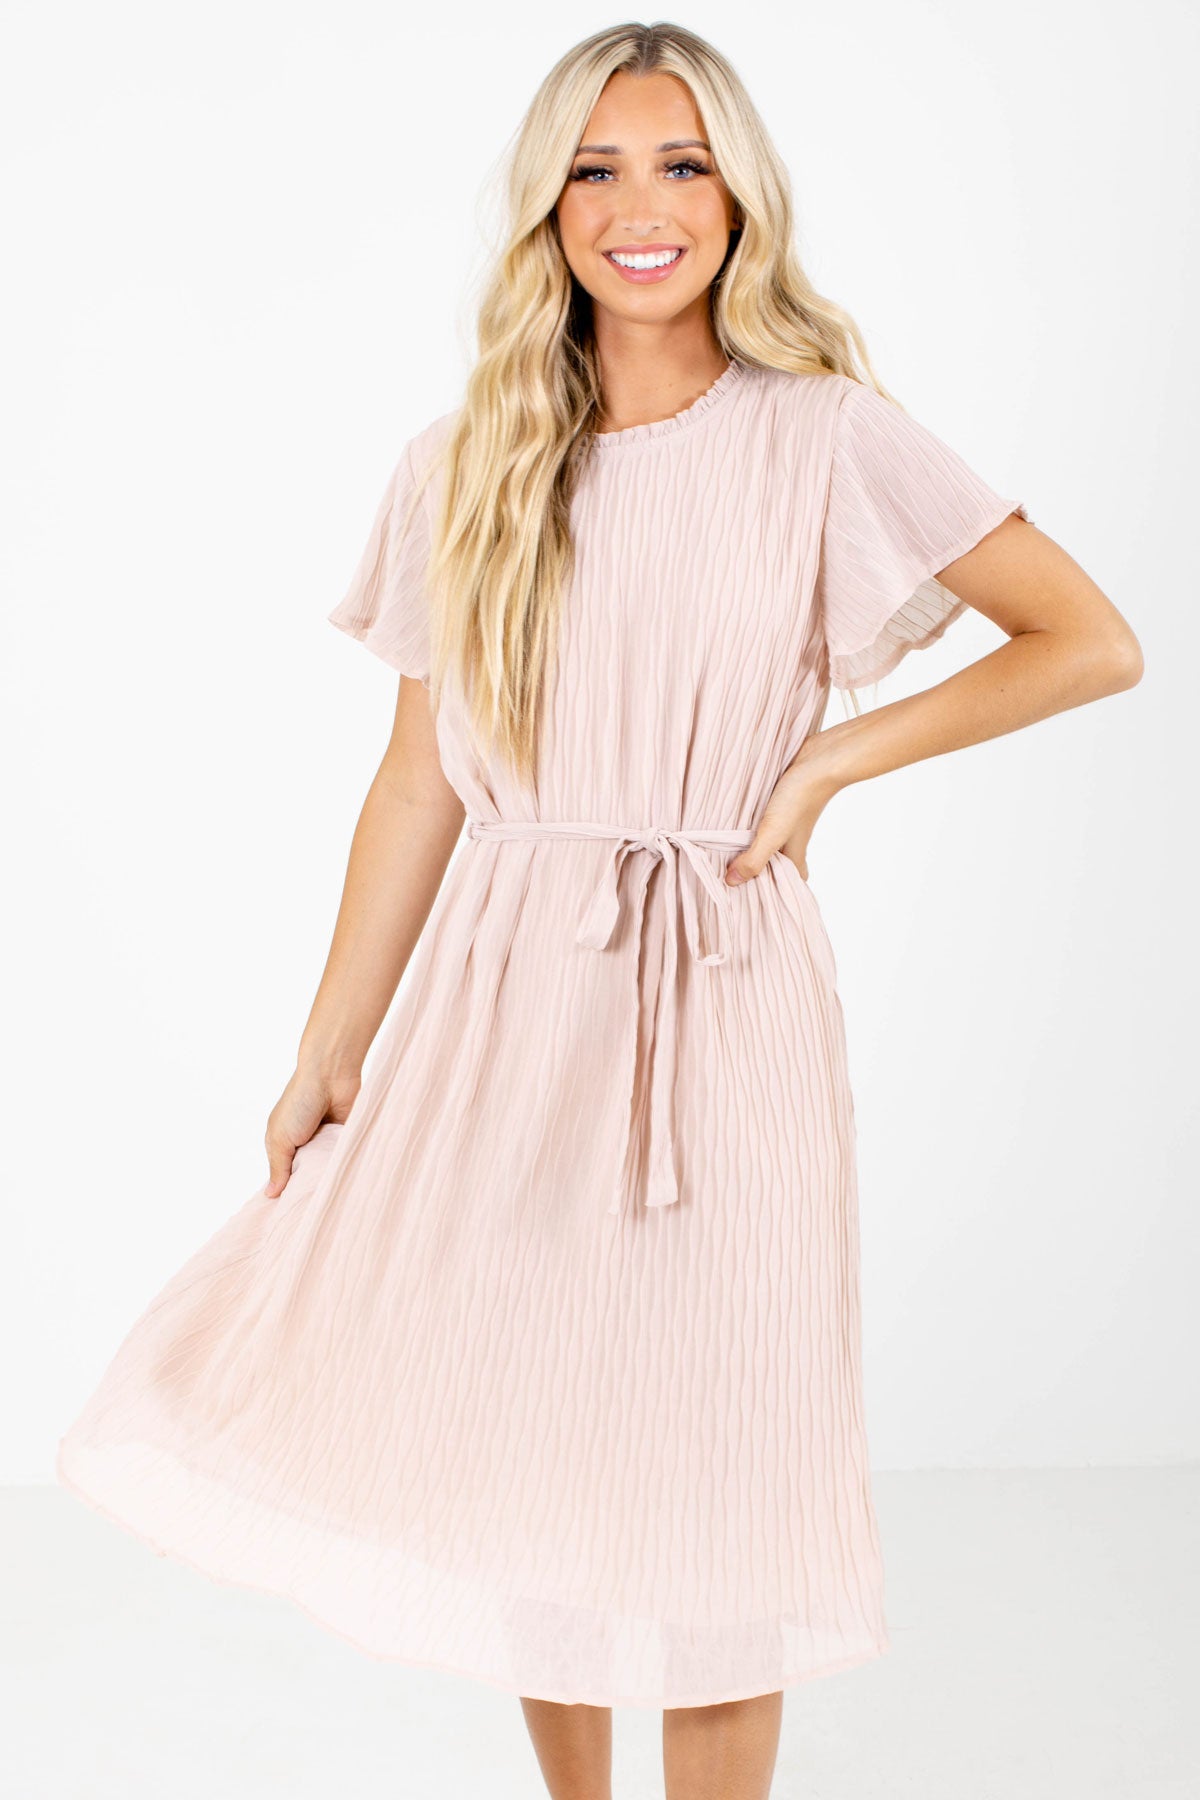 Pink High-Quality Textured Material Boutique Knee-Length Dresses for Women